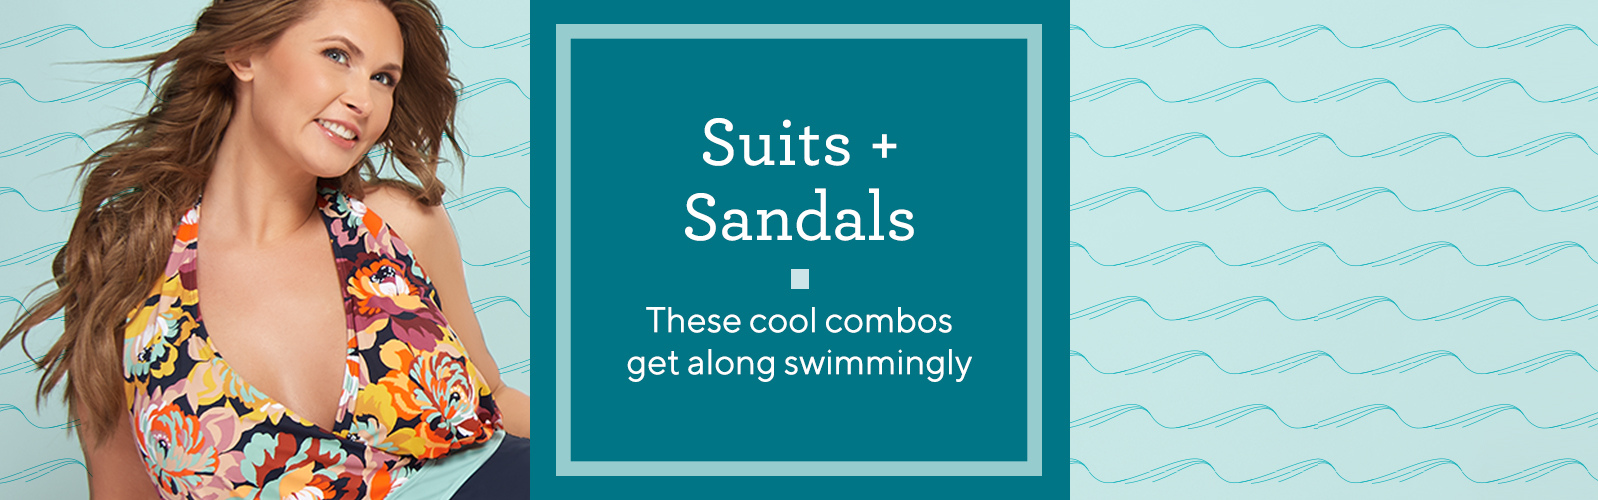 Suits + Sandals  These cool combos get along swimmingly